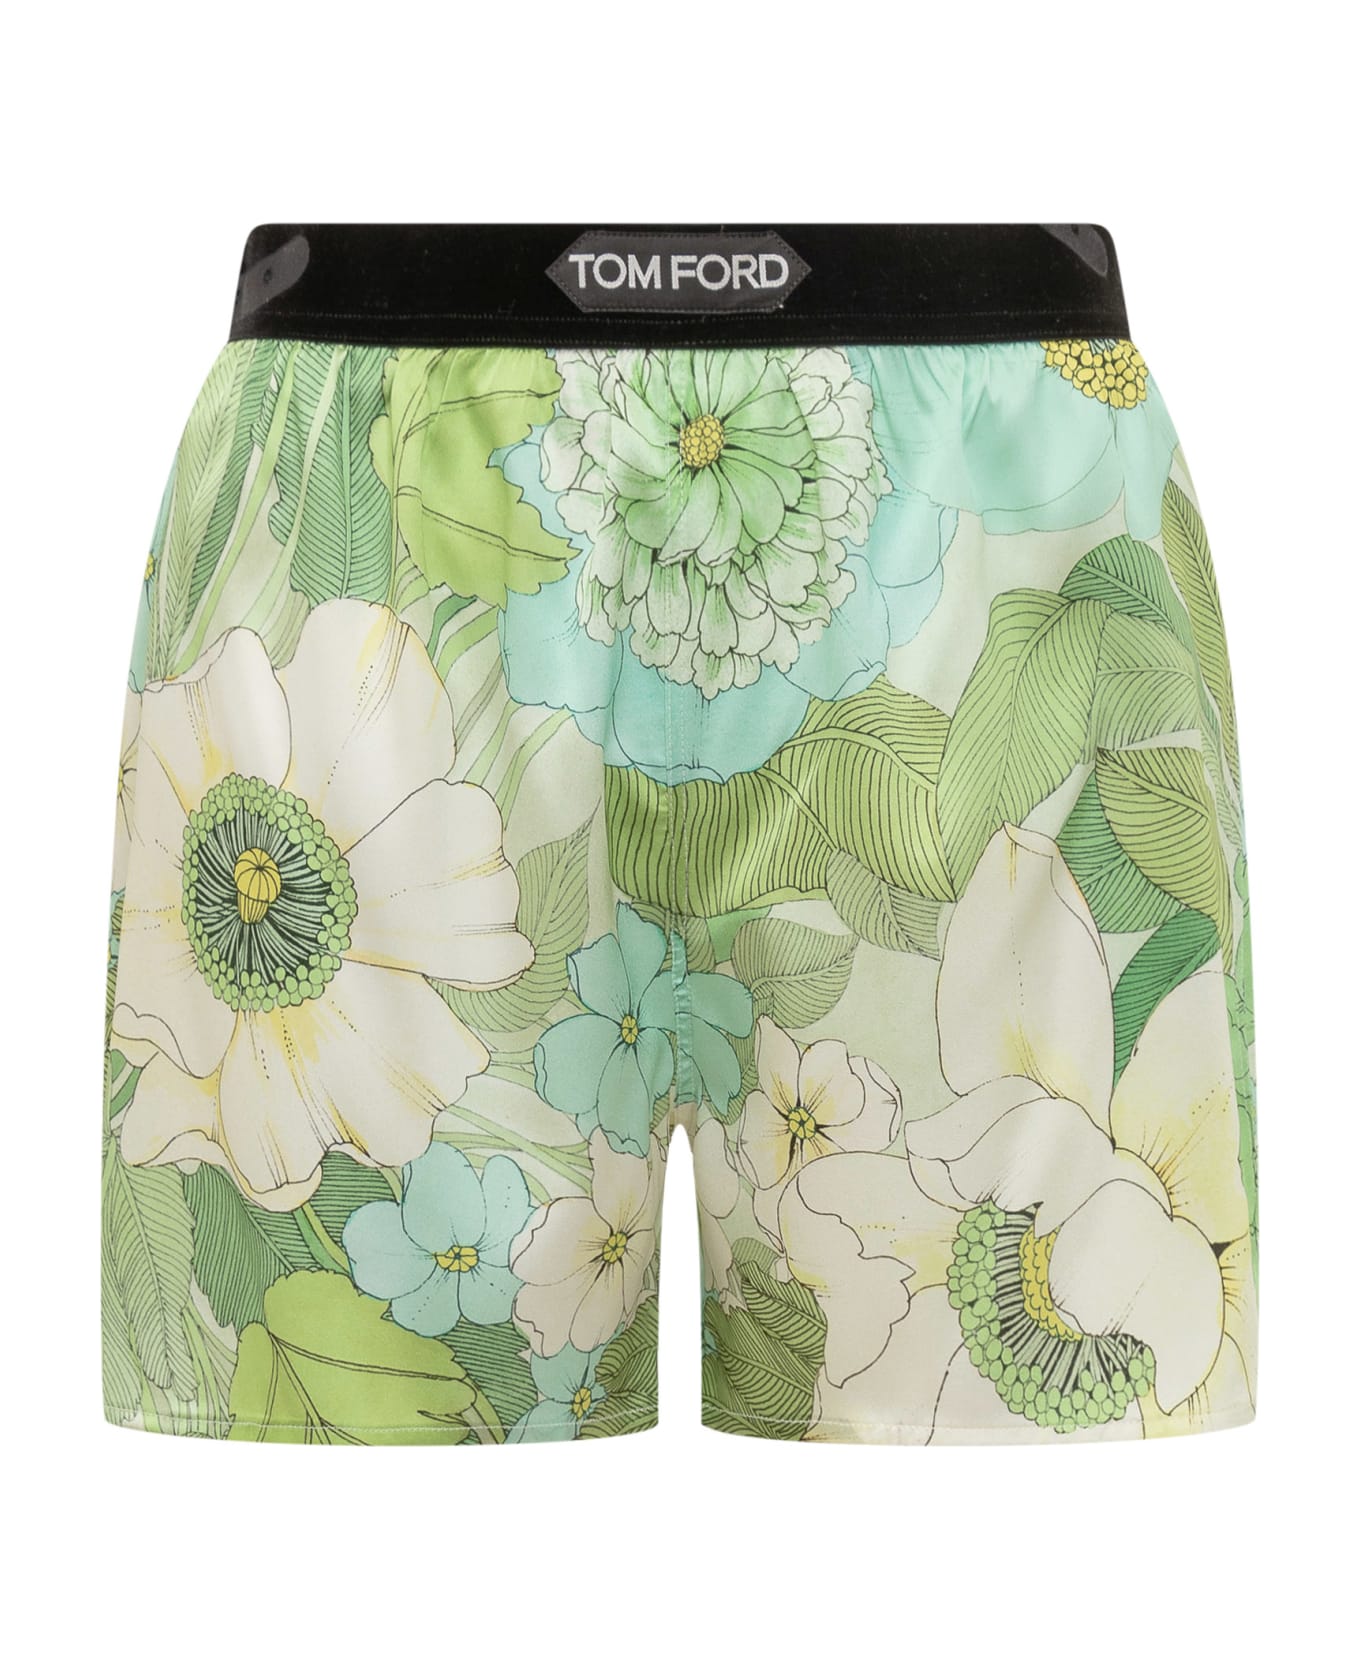 Tom Ford Shorts With Floral Decoration - ZAQGR AQUA/PALE GREEN